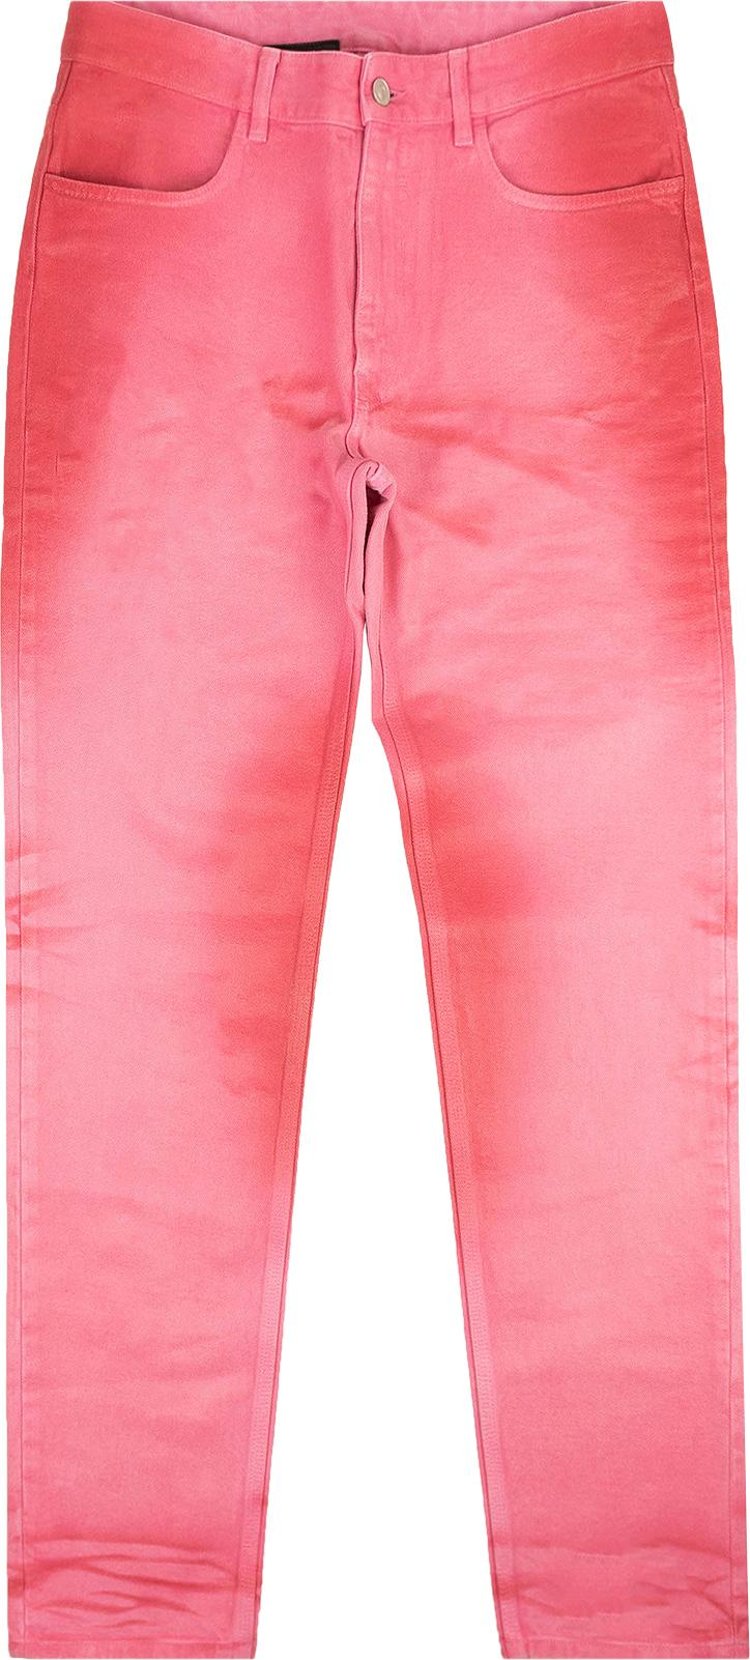 Givenchy Dyed Slim Fit Denim Jeans 'Pink'